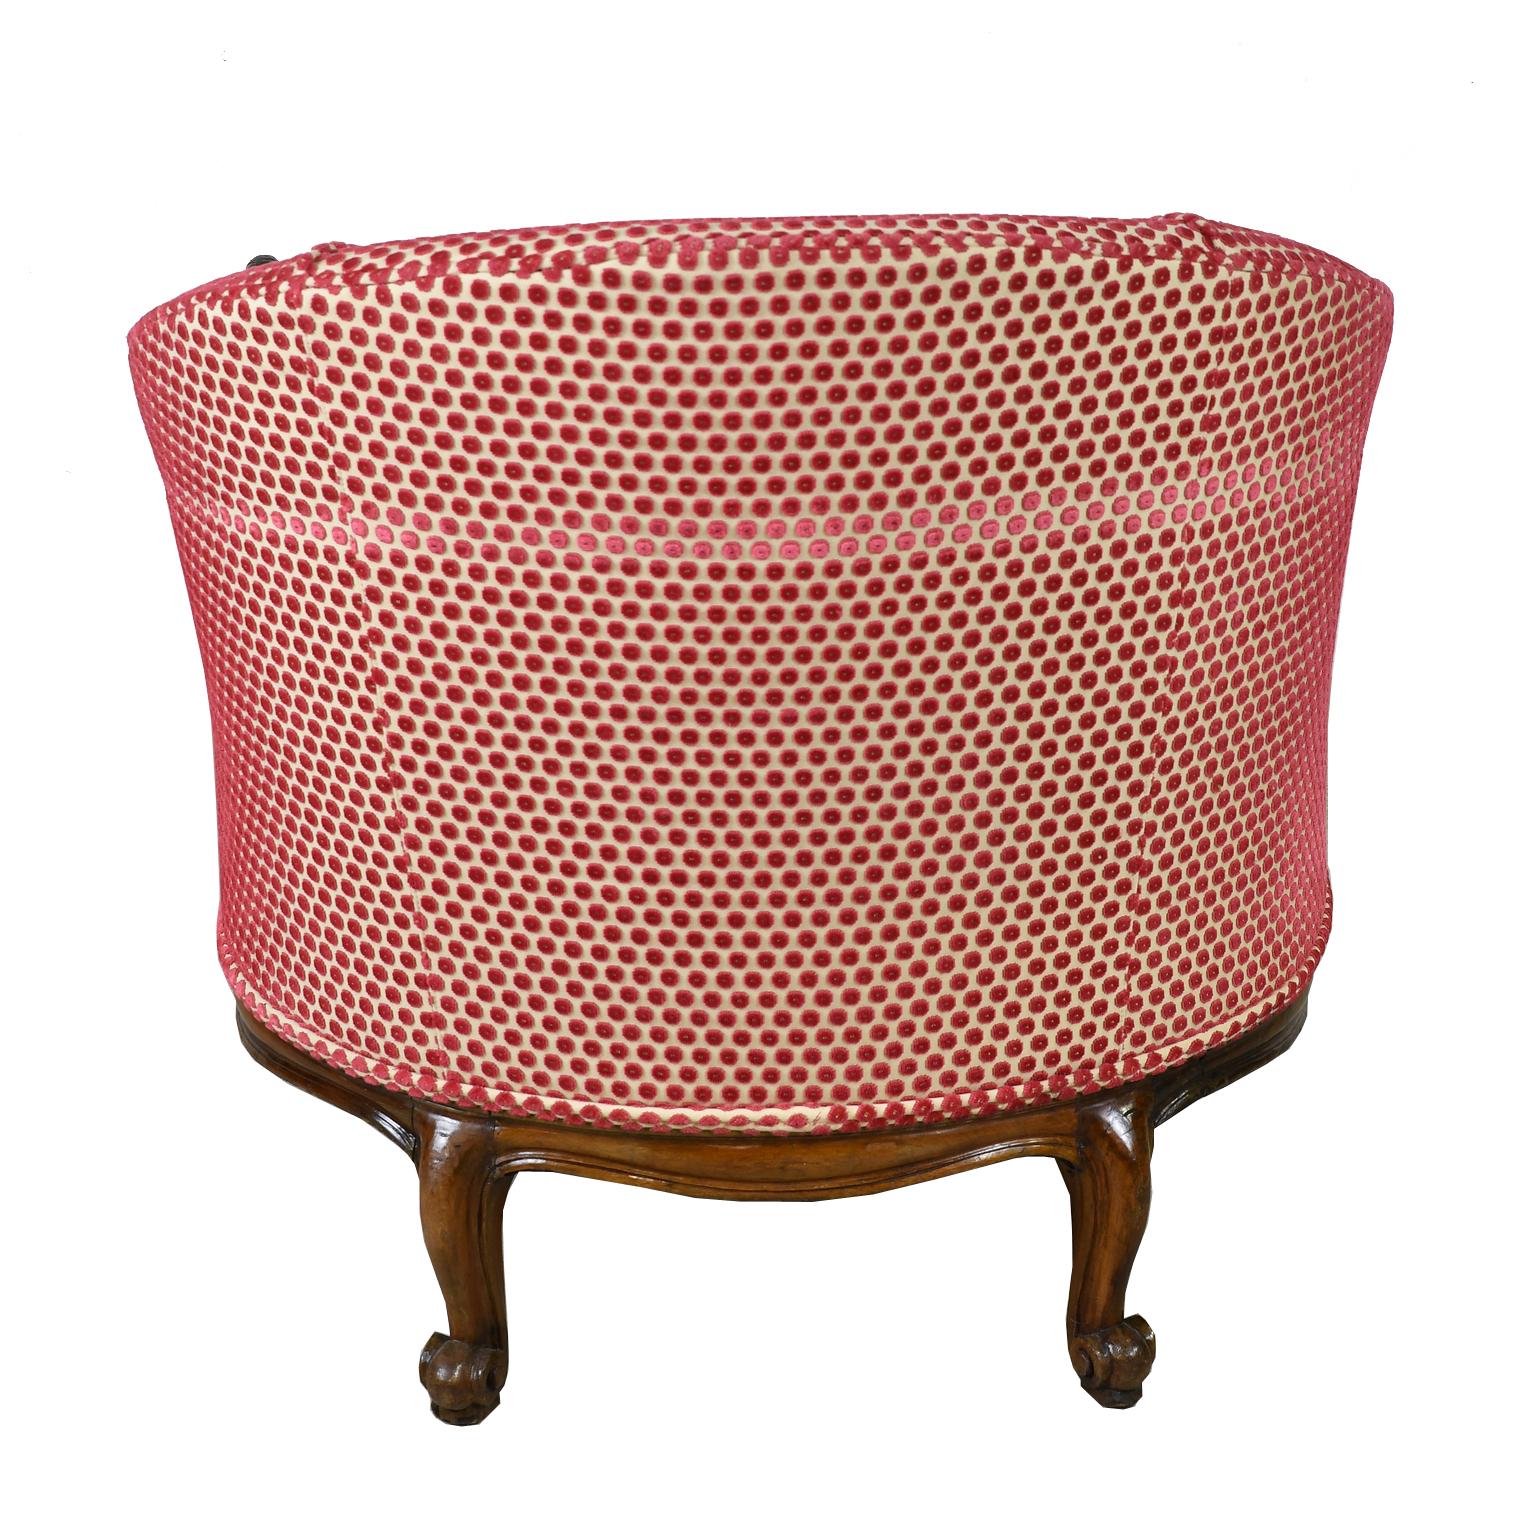 Upholstery Belle Époque Upholstered Club Chair in Rose-Colored Cut Velvet with Carved Swans